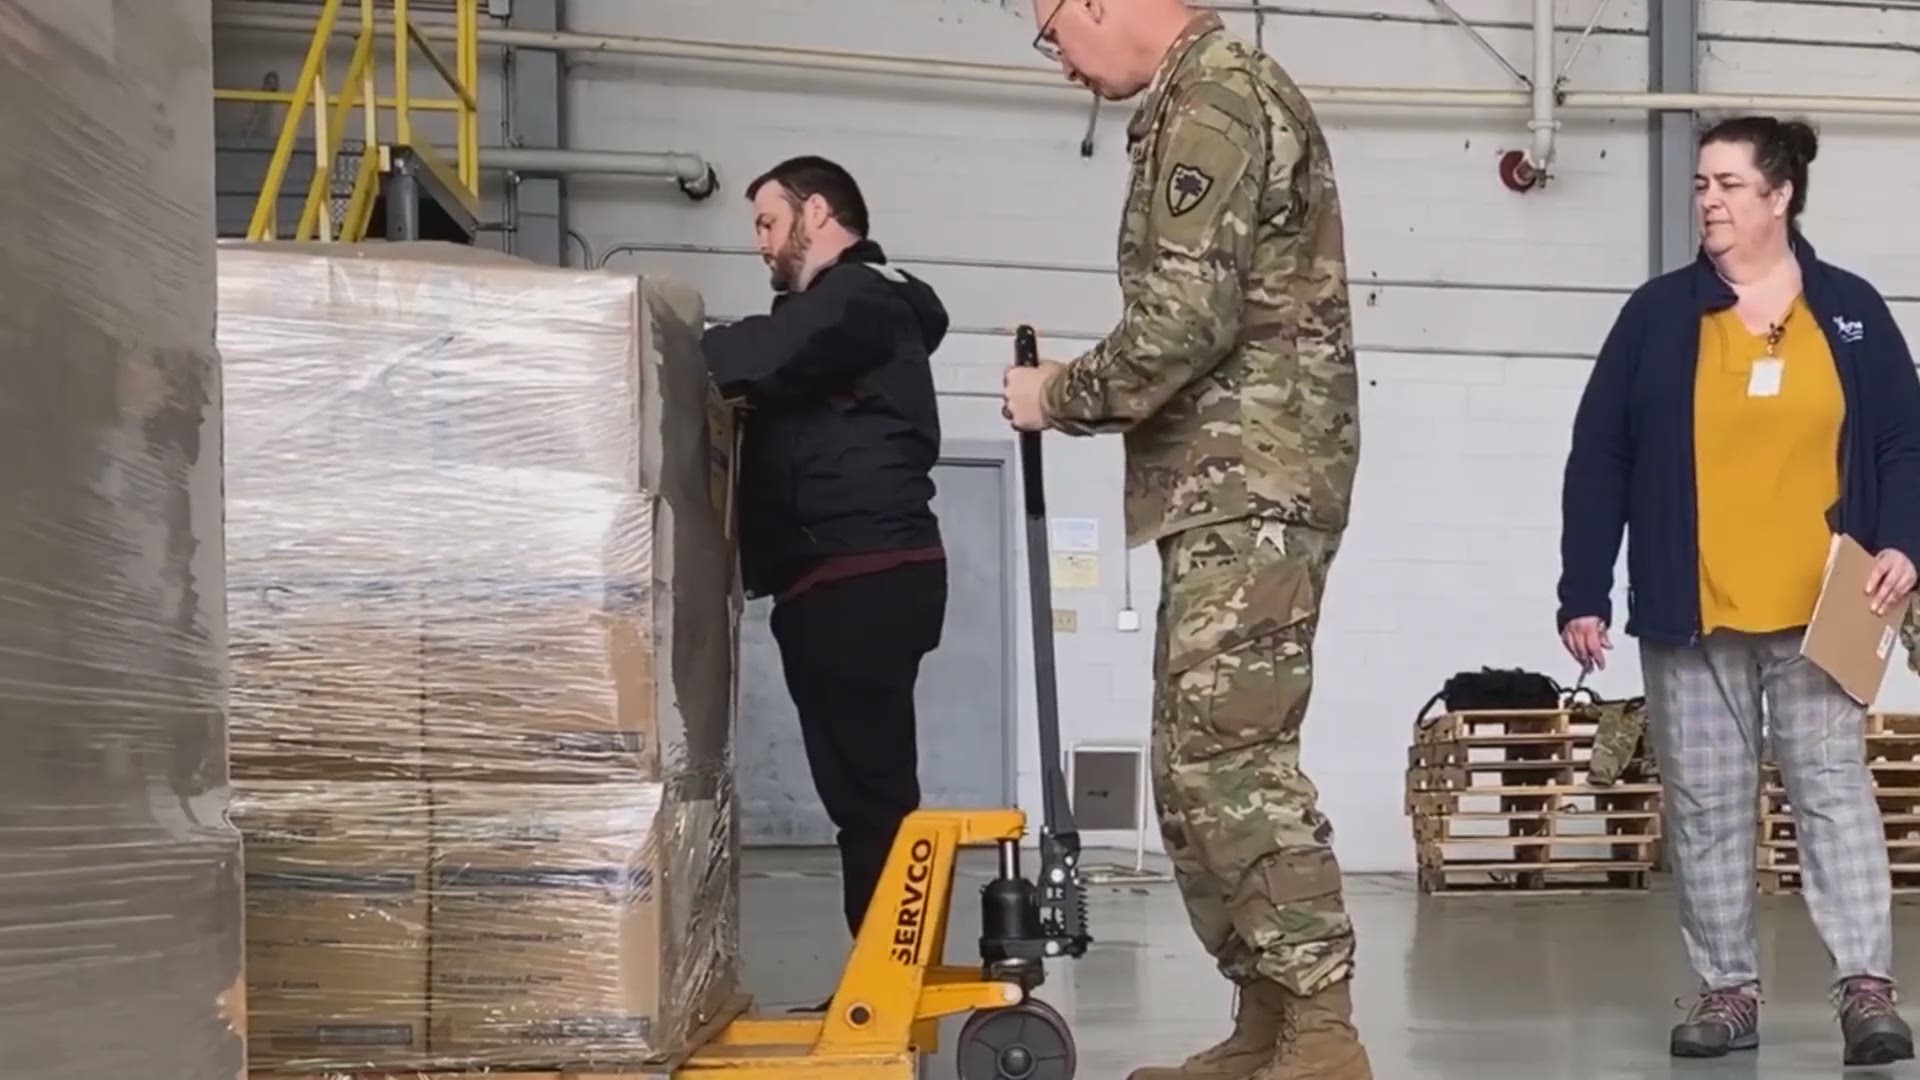 The South Carolina National Guard unloading Tuesday a new shipment of personal protective equipment for South Carolina.